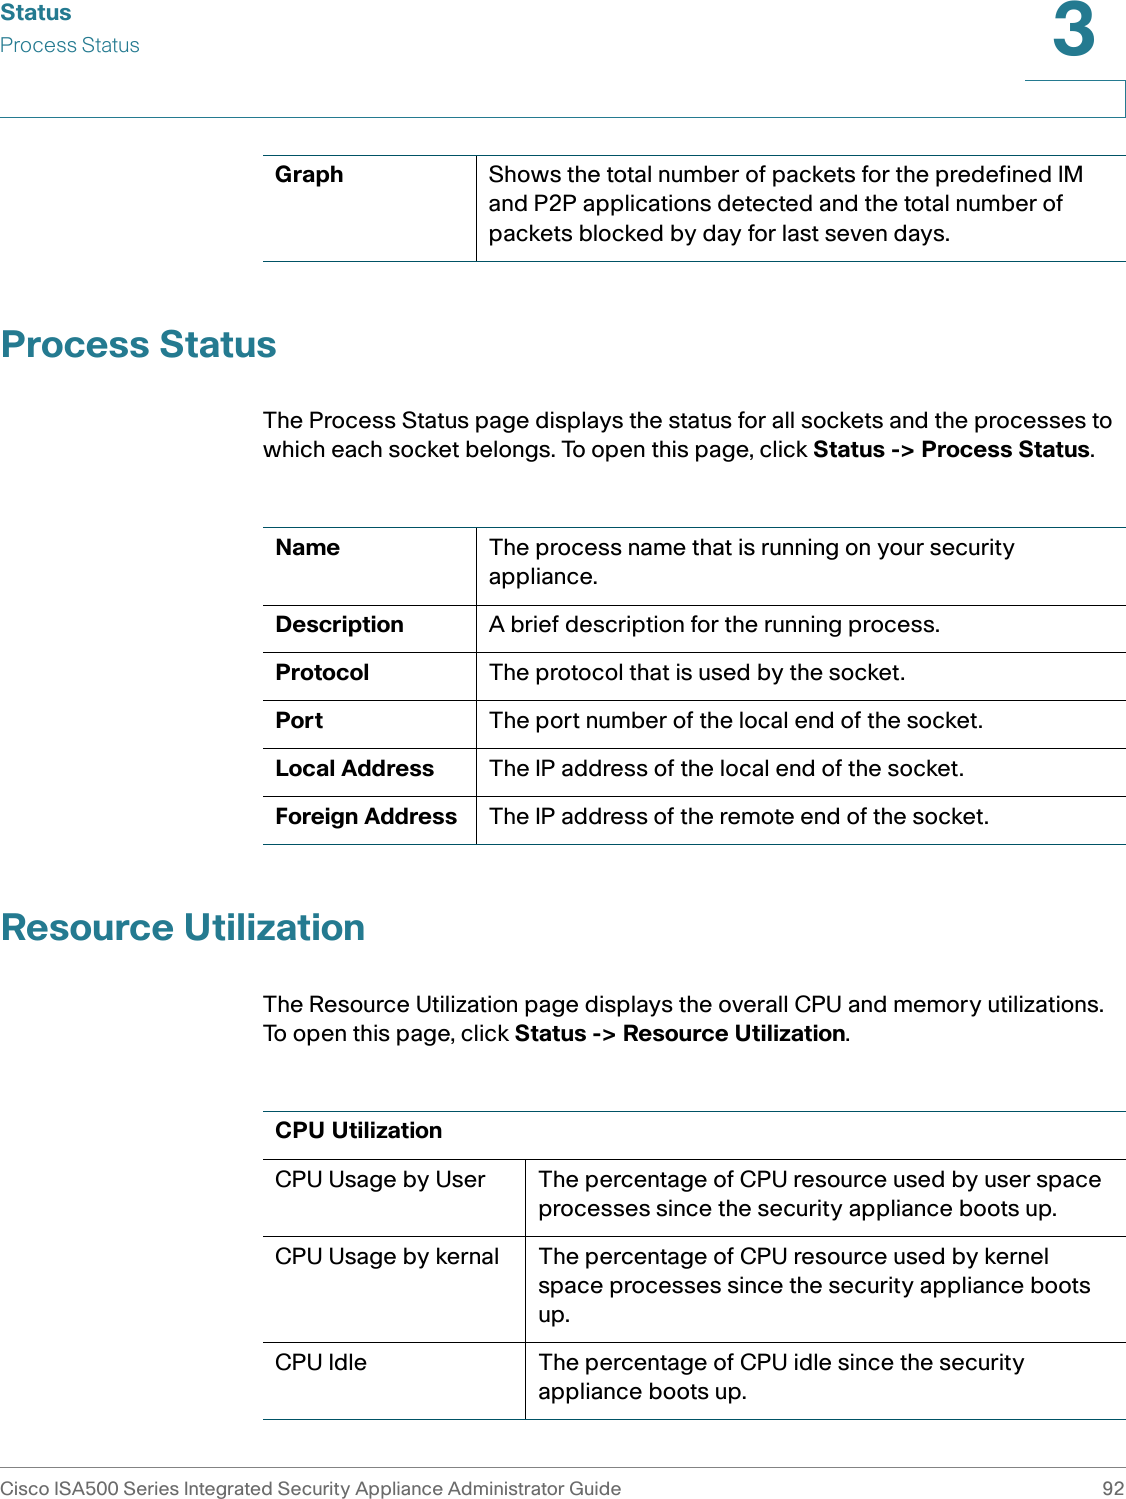 StatusProcess StatusCisco ISA500 Series Integrated Security Appliance Administrator Guide 923 Process StatusThe Process Status page displays the status for all sockets and the processes to which each socket belongs. To open this page, click Status -&gt; Process Status.Resource UtilizationThe Resource Utilization page displays the overall CPU and memory utilizations. To open this page, click Status -&gt; Resource Utilization.Graph Shows the total number of packets for the predefined IM and P2P applications detected and the total number of packets blocked by day for last seven days.Name The process name that is running on your security appliance.Description A brief description for the running process. Protocol The protocol that is used by the socket. Port The port number of the local end of the socket. Local Address The IP address of the local end of the socket. Foreign Address The IP address of the remote end of the socket. CPU UtilizationCPU Usage by User The percentage of CPU resource used by user space processes since the security appliance boots up.CPU Usage by kernal The percentage of CPU resource used by kernel space processes since the security appliance boots up.CPU Idle The percentage of CPU idle since the security appliance boots up.